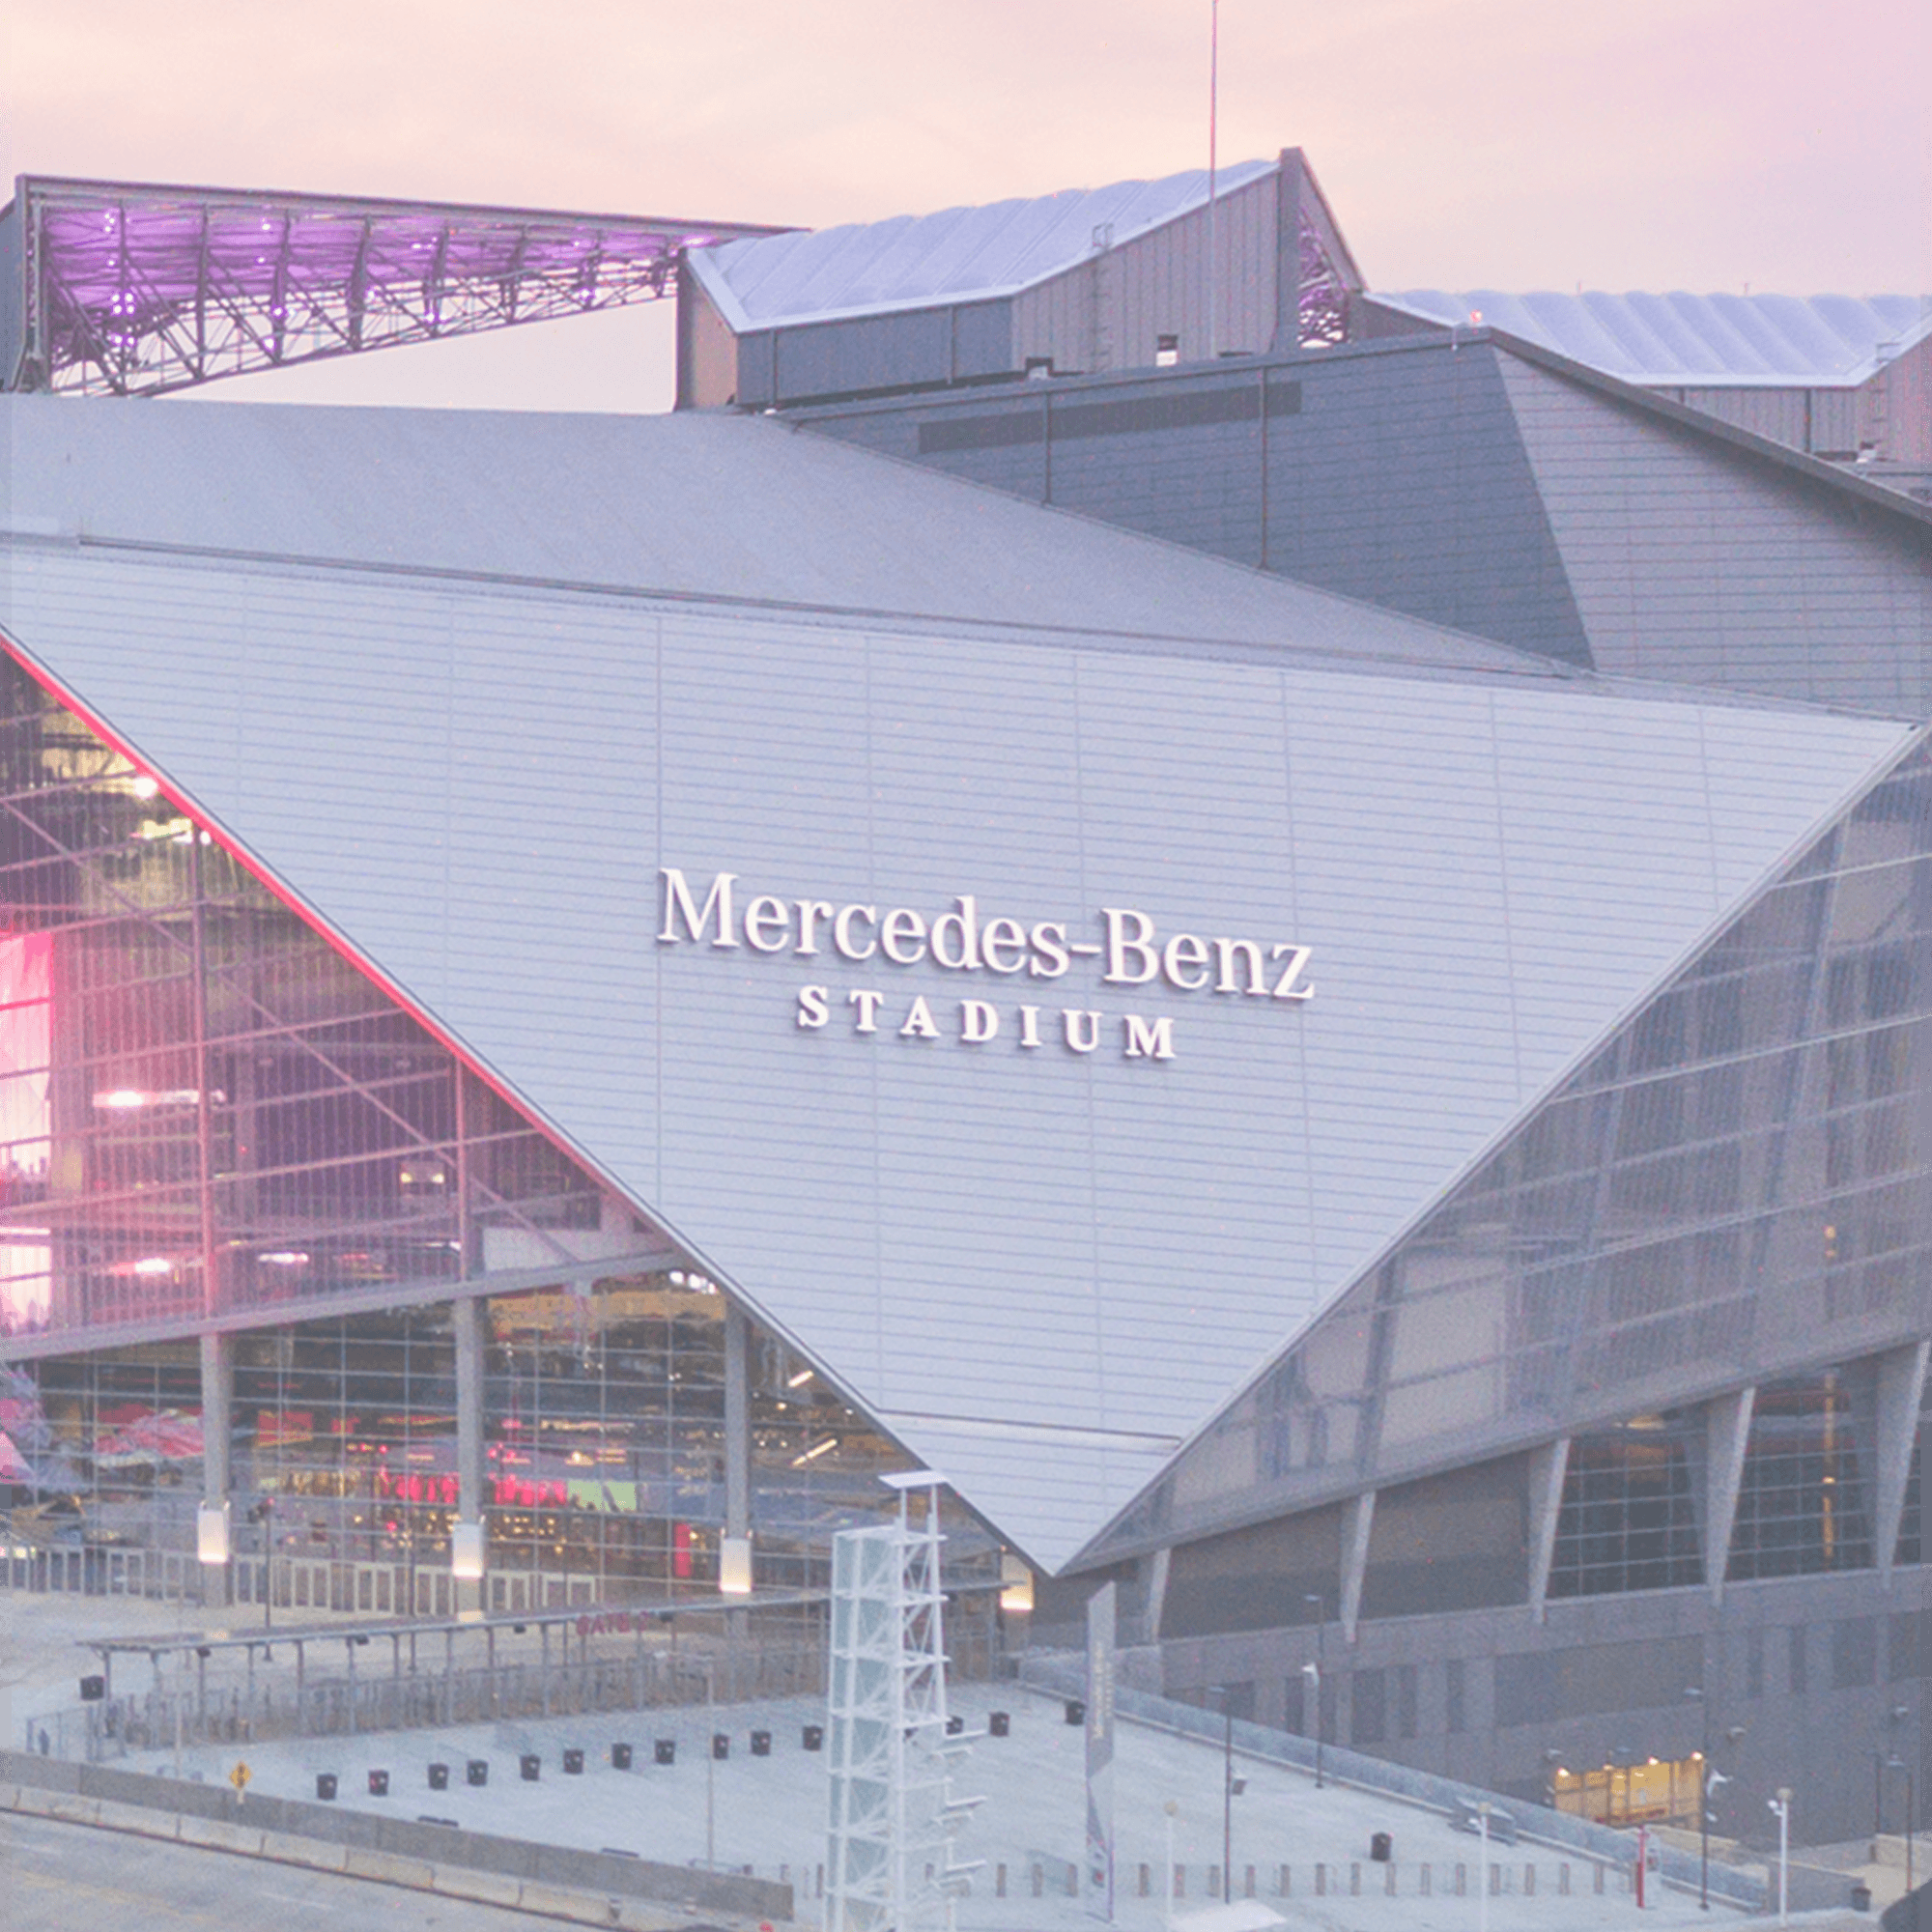 Thumbnail for "Atlanta Falcons’ Mercedes-Benz Stadium: A Sustainable Home for NFL Games and Beyond".